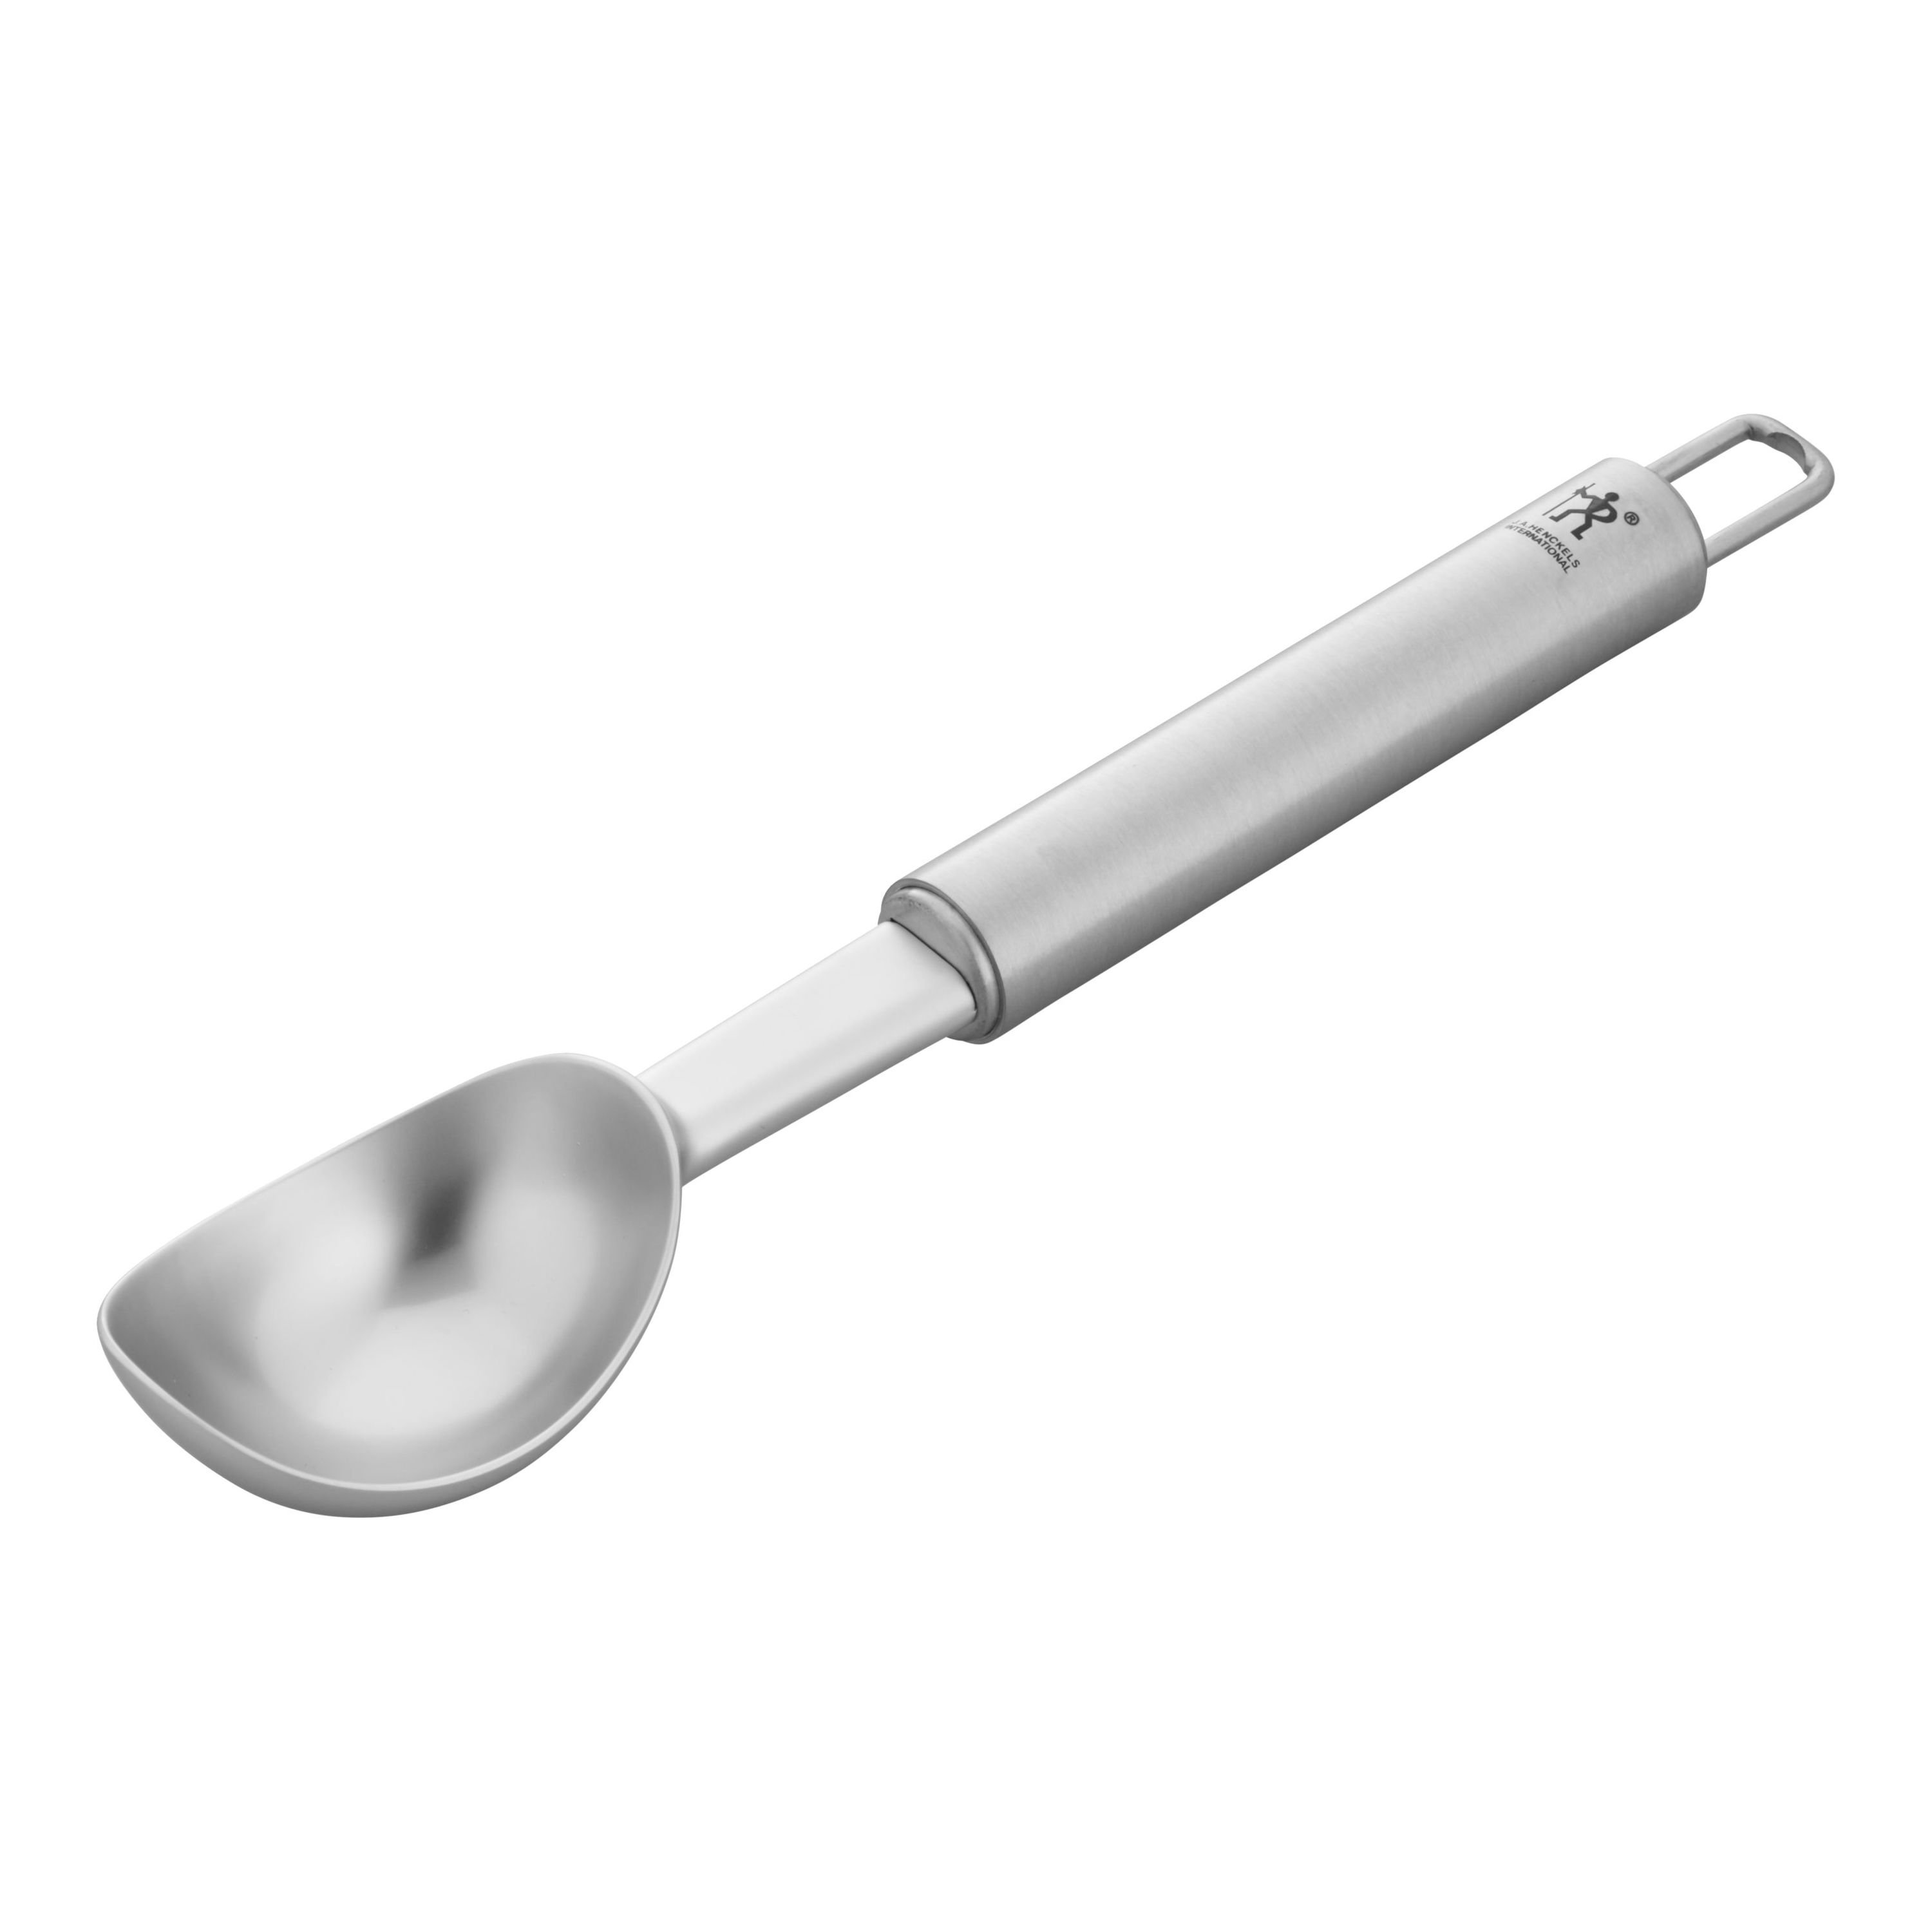 Cookies Anlising Stainless Steel Scoop Cake Dough Silver Melon 40 mm Ice Cream Scoop Stainless Steel Ice Cream Scoop for Ice Cream 